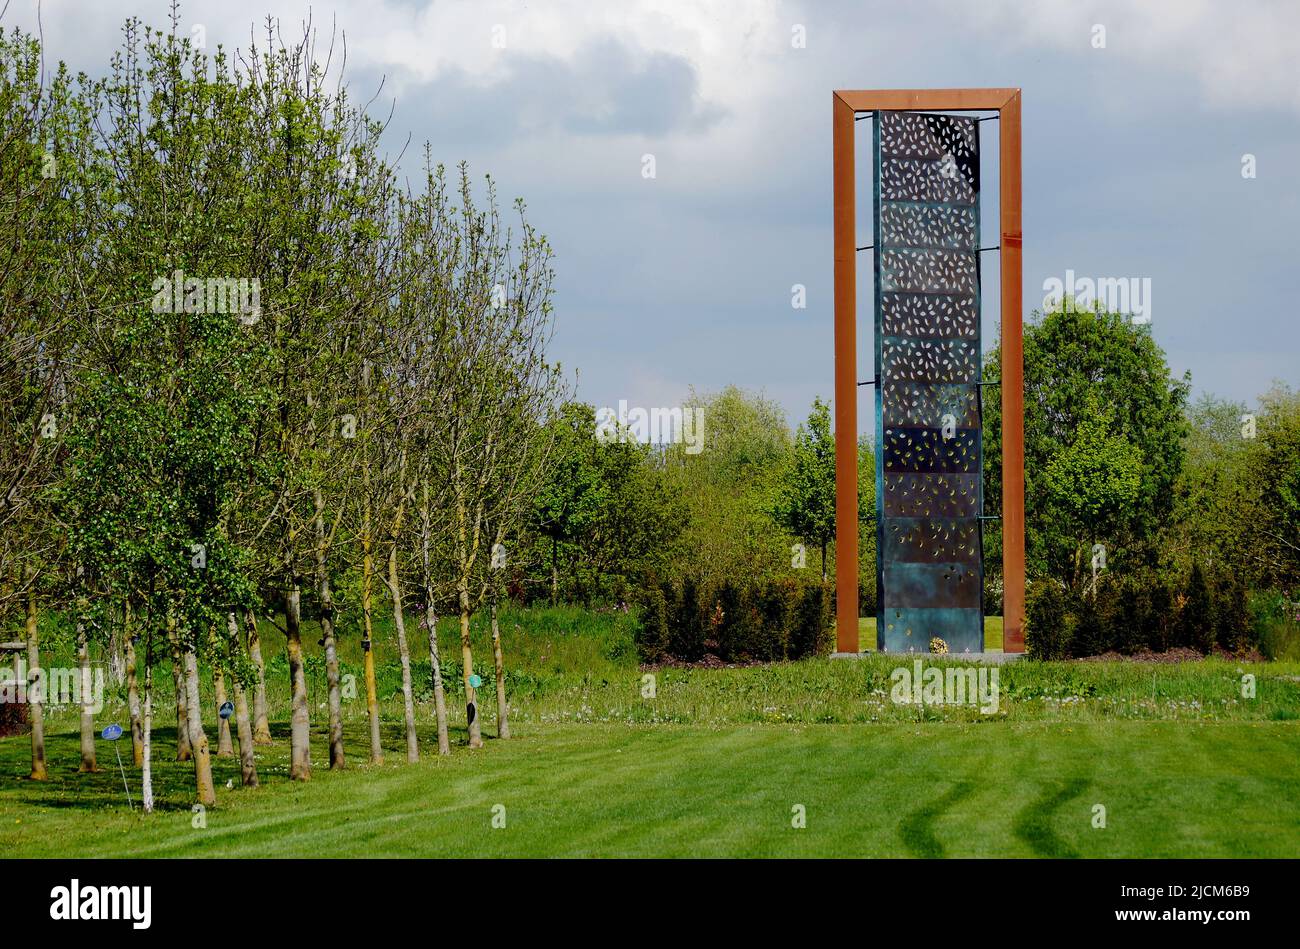 UK Police Memorial, a 12 Metre Tall Brass Structure Pays Tribute to Fallen Officers at the National Memorial Arboretum, Staffordshire, England, UK. Stock Photo